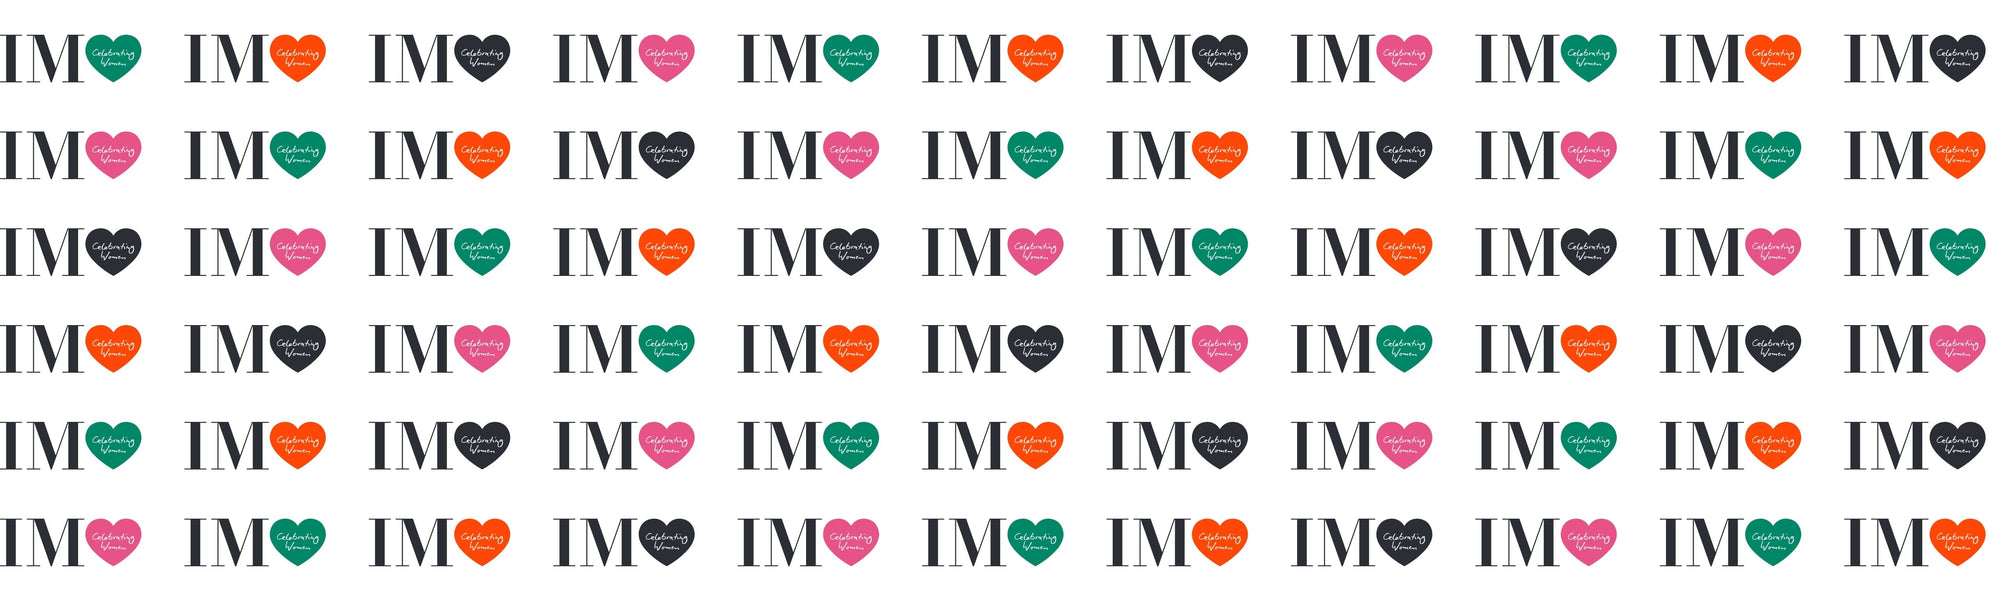 repeating Isaac Mizrahi Logo "IM" with colored hearts next to it with "celebrating women" inside